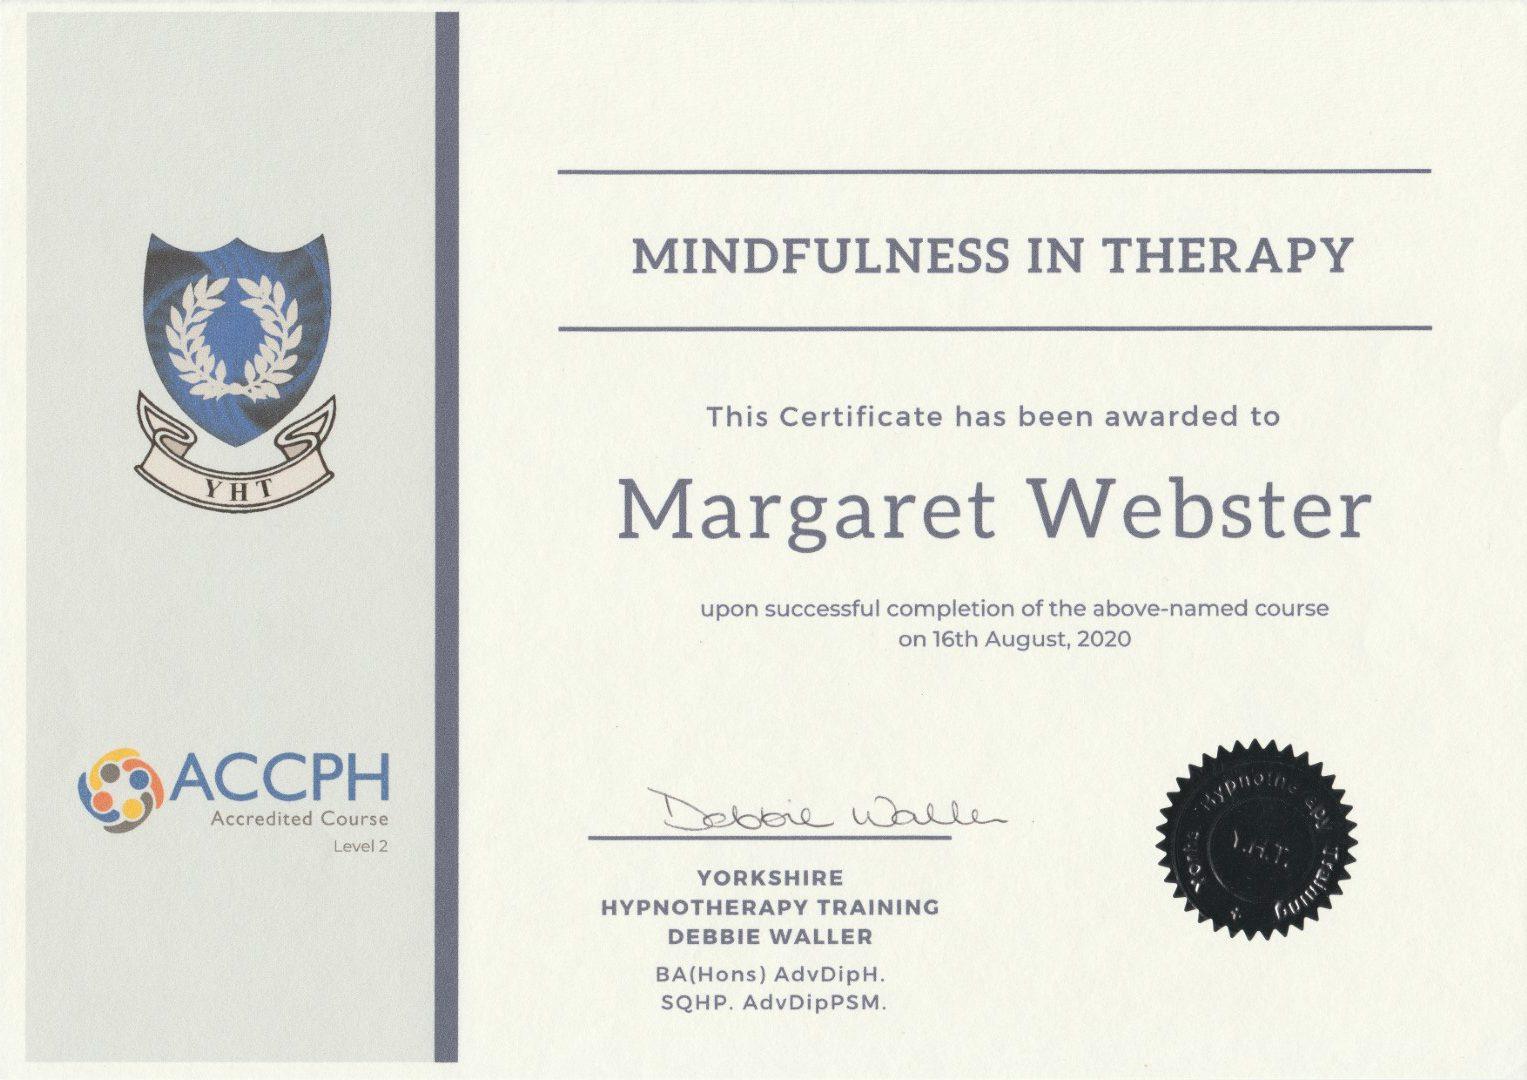 Mindfulness-in-therapy-Large-rotated-1